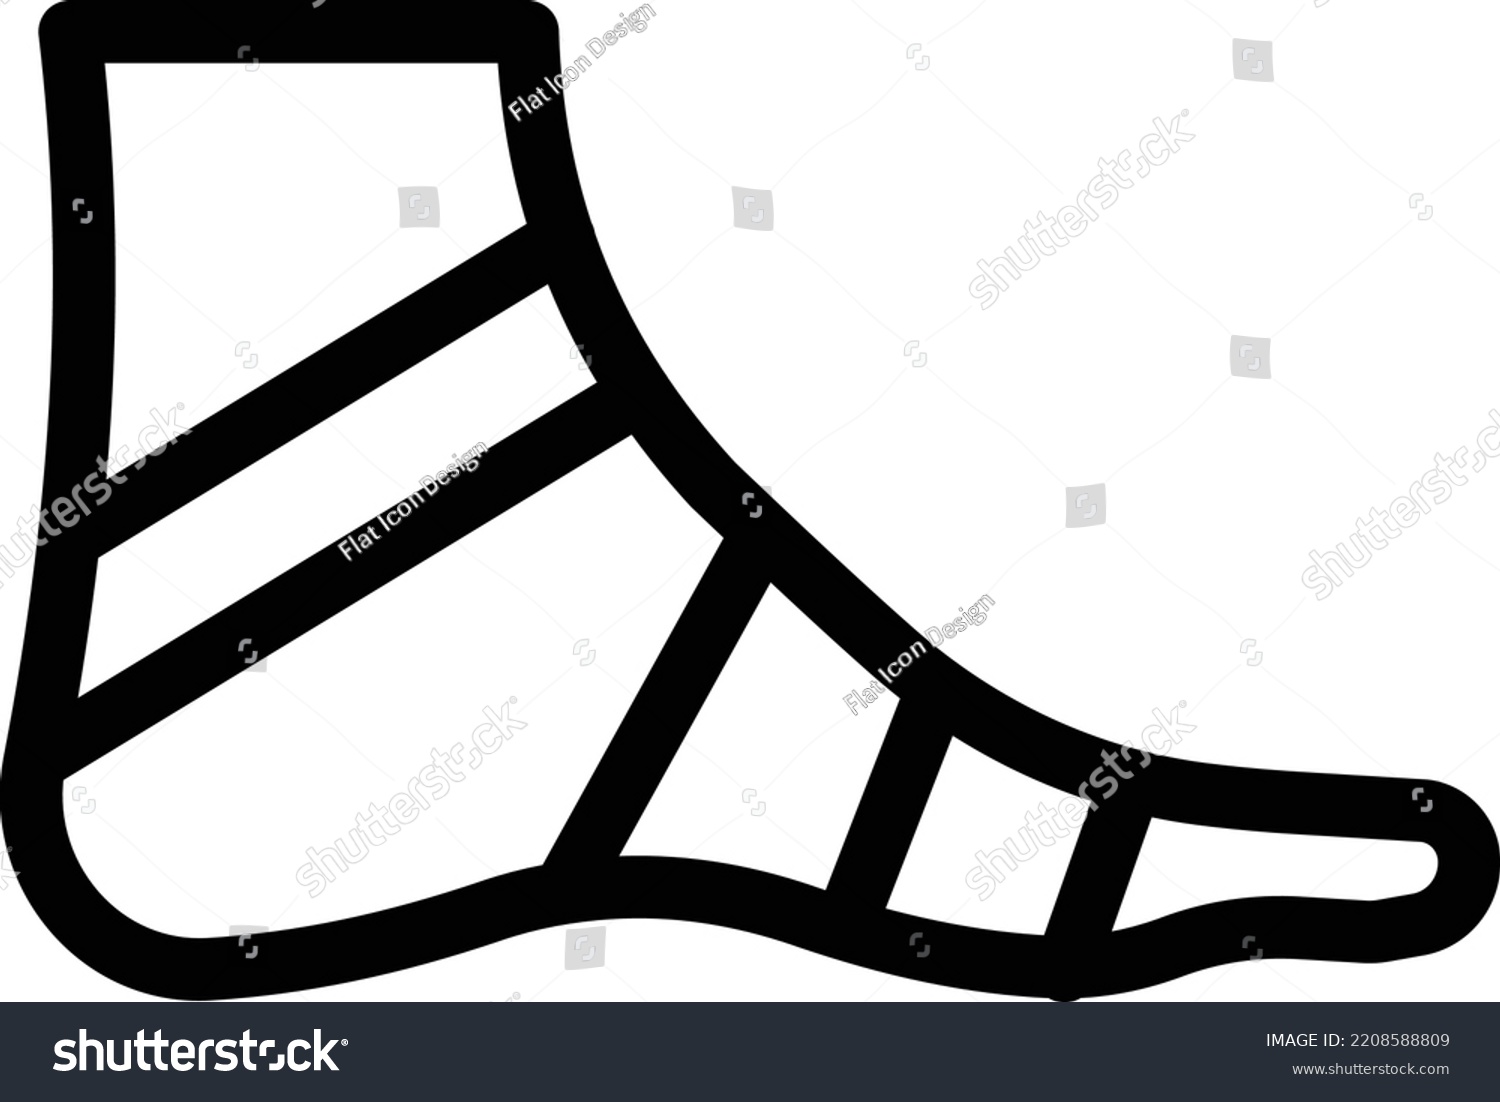 SVG of foot  Vector illustration on a transparent background. Premium quality symmbols. Thin line vector icons for concept and graphic design. 
 svg